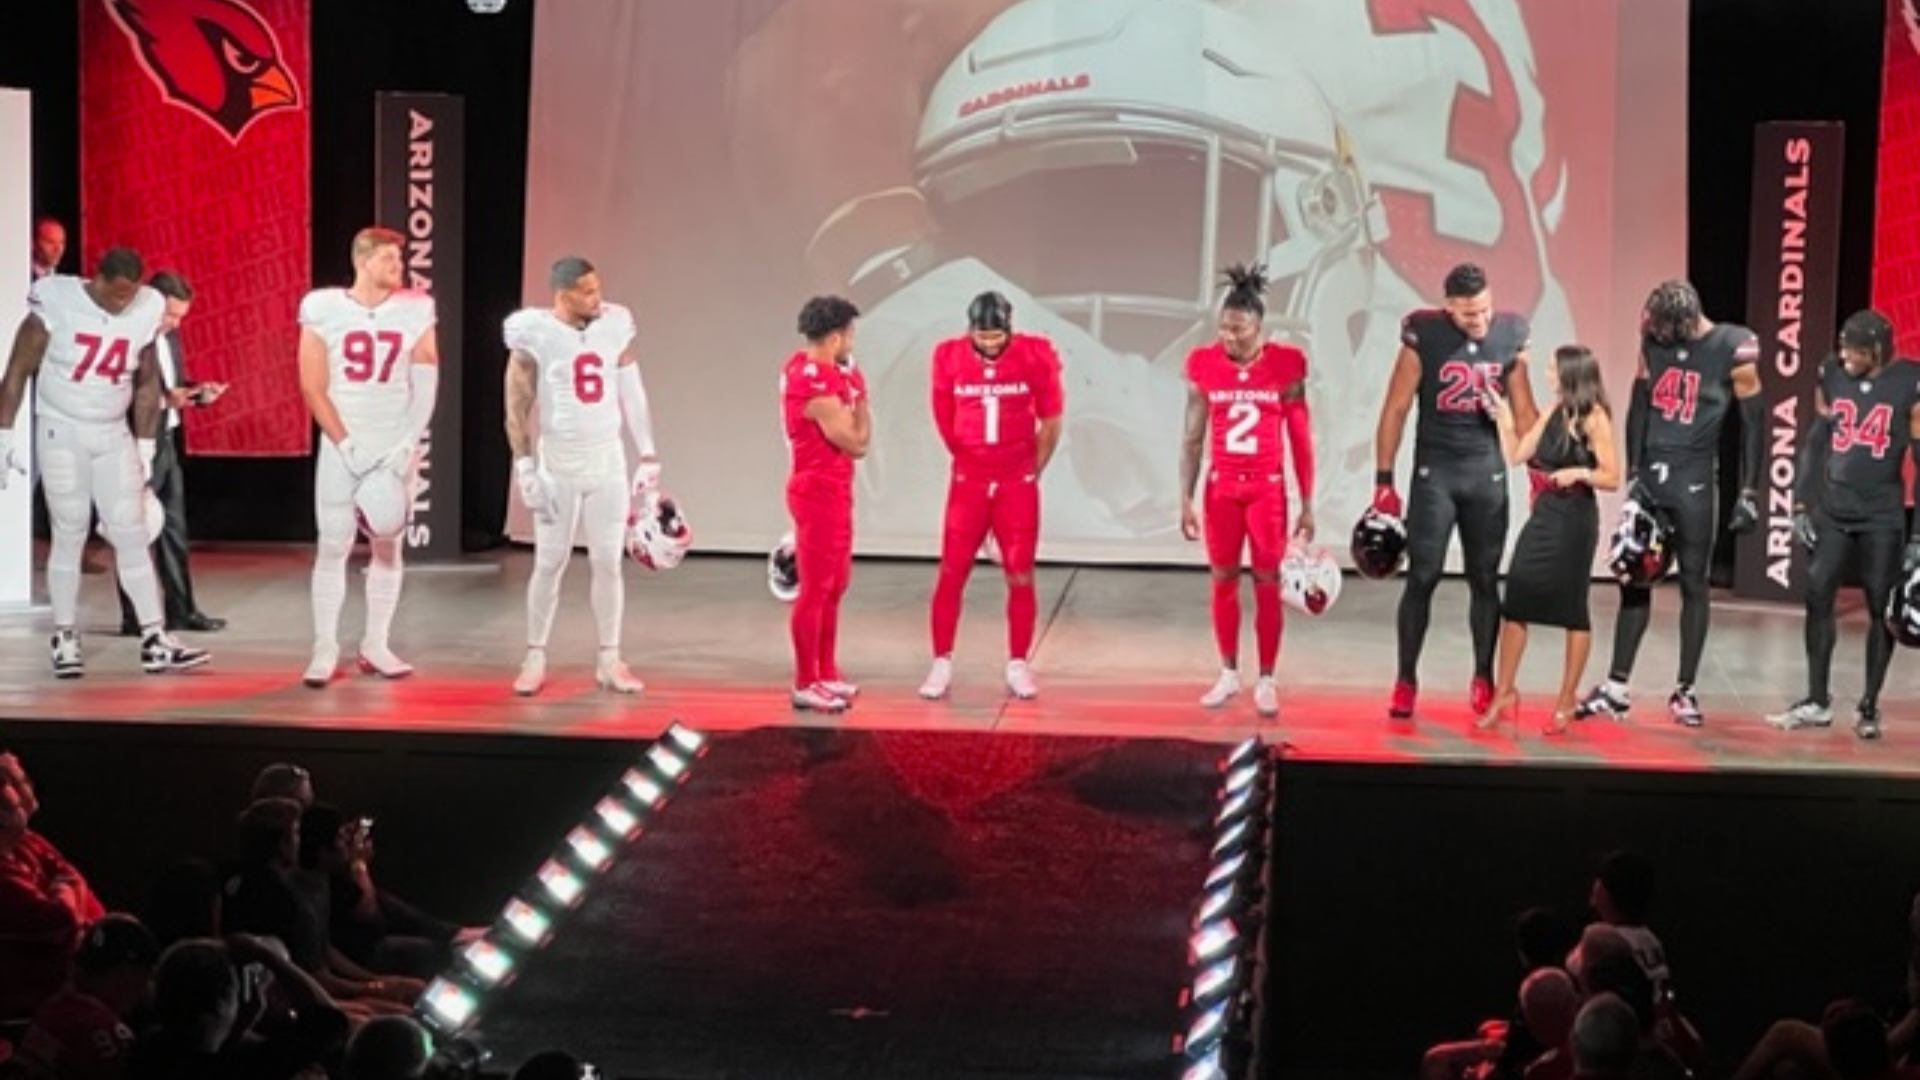 The Arizona Cardinals unveiled new uniforms. Here's the new look